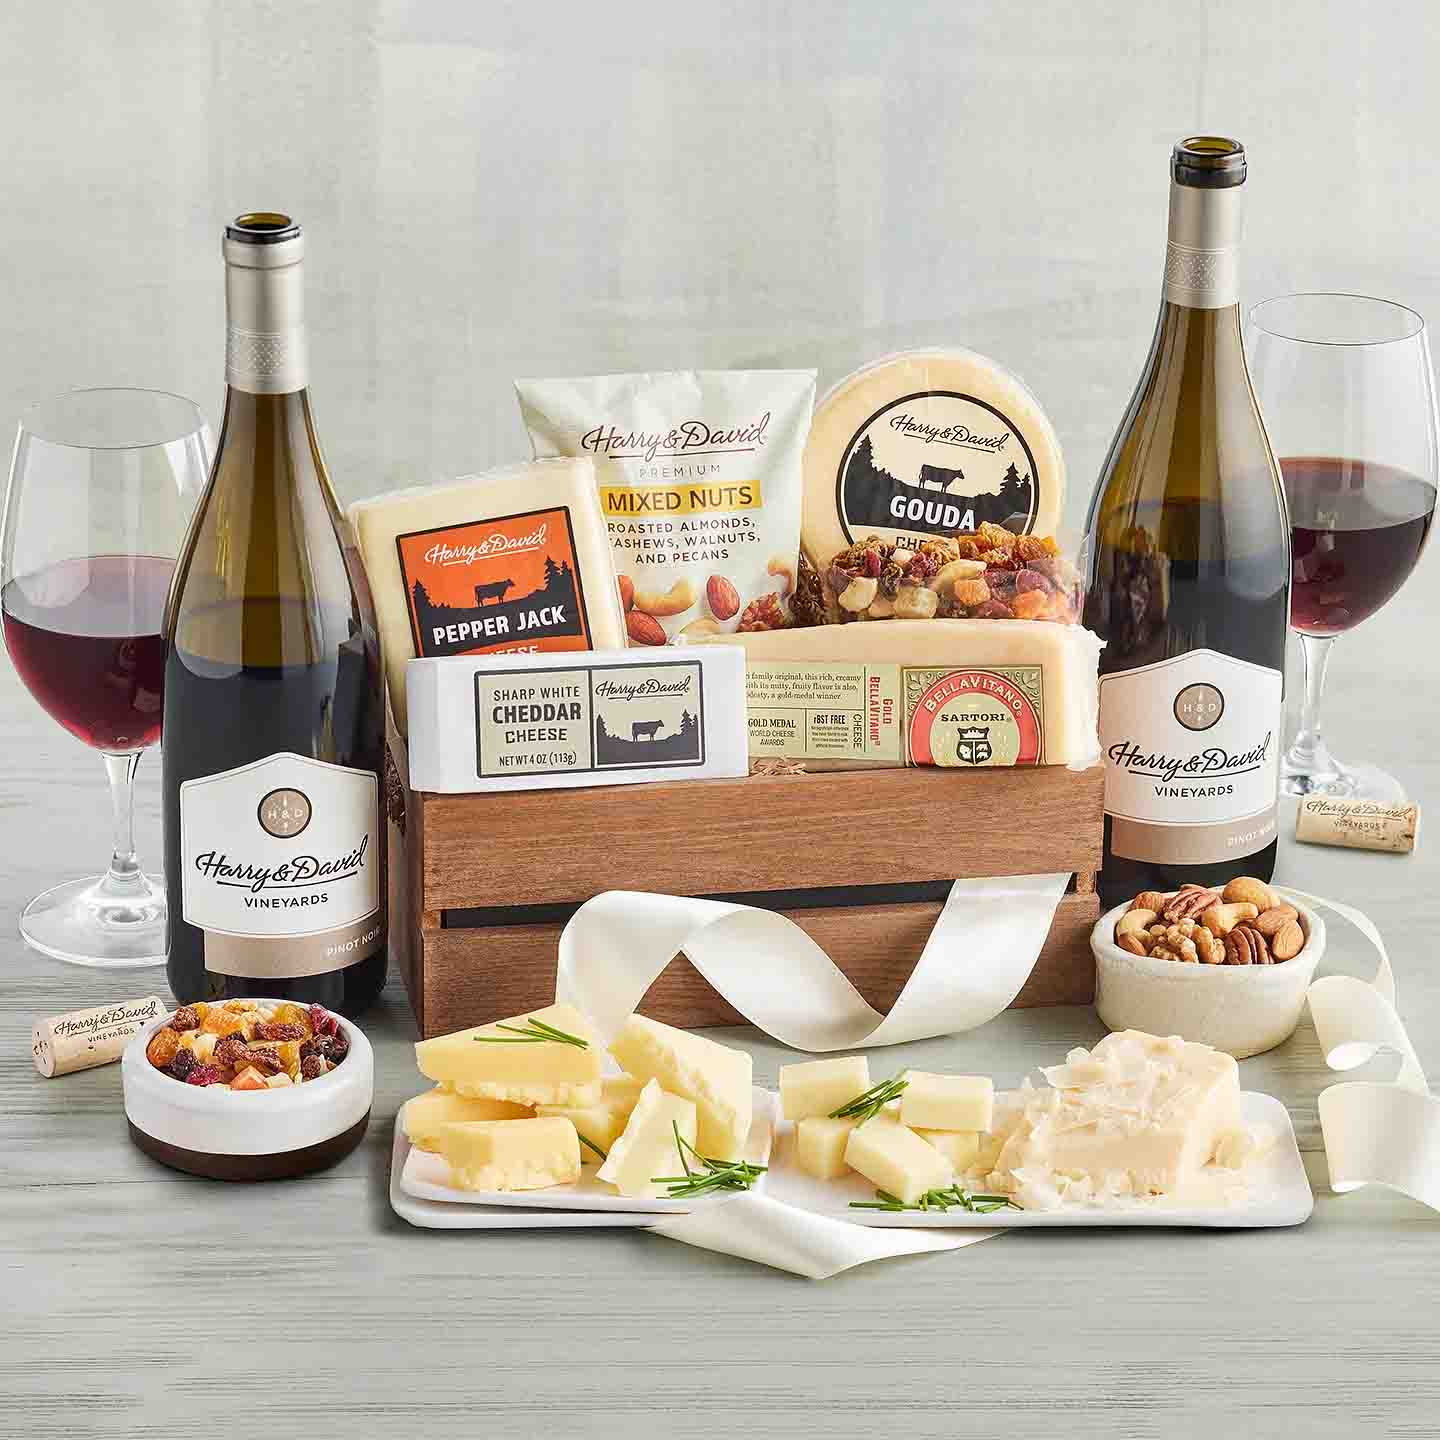 Gourmet Cheese Gift basket with two bottles of wine, packet of mixed nuts, banana chips